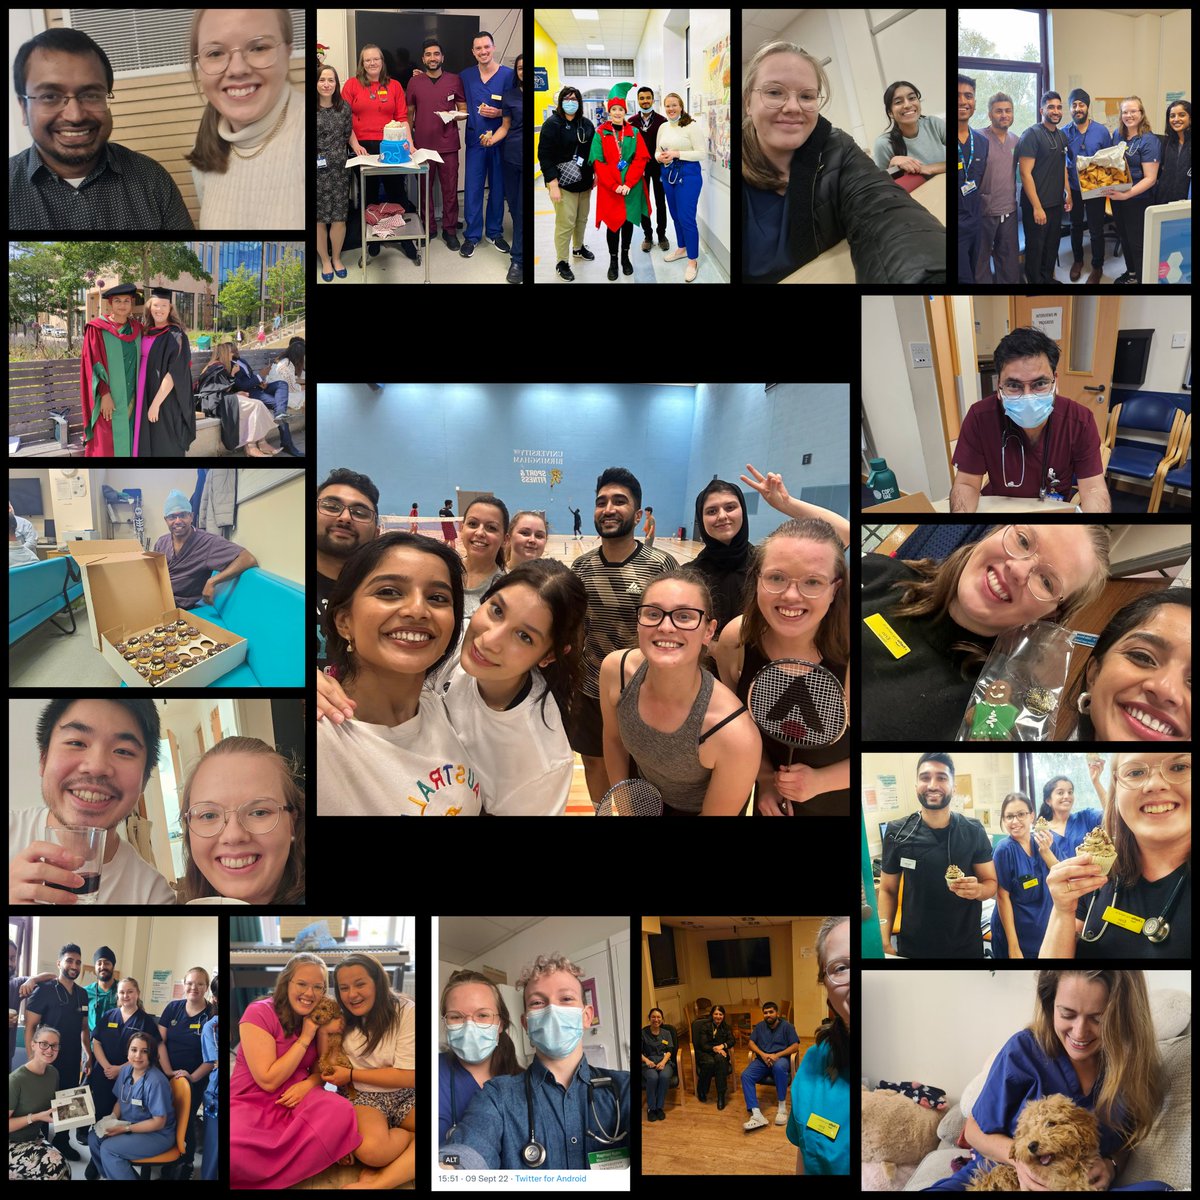 Today is National Doctor's Day! #nationaldoctorsday I work with doctors every day, from FY1 to consultant, who go above and beyond and don't get half the recognition they deserve, so I'm going to shout about them! ❤️ Here is just a selection of docs I've been lucky to work with